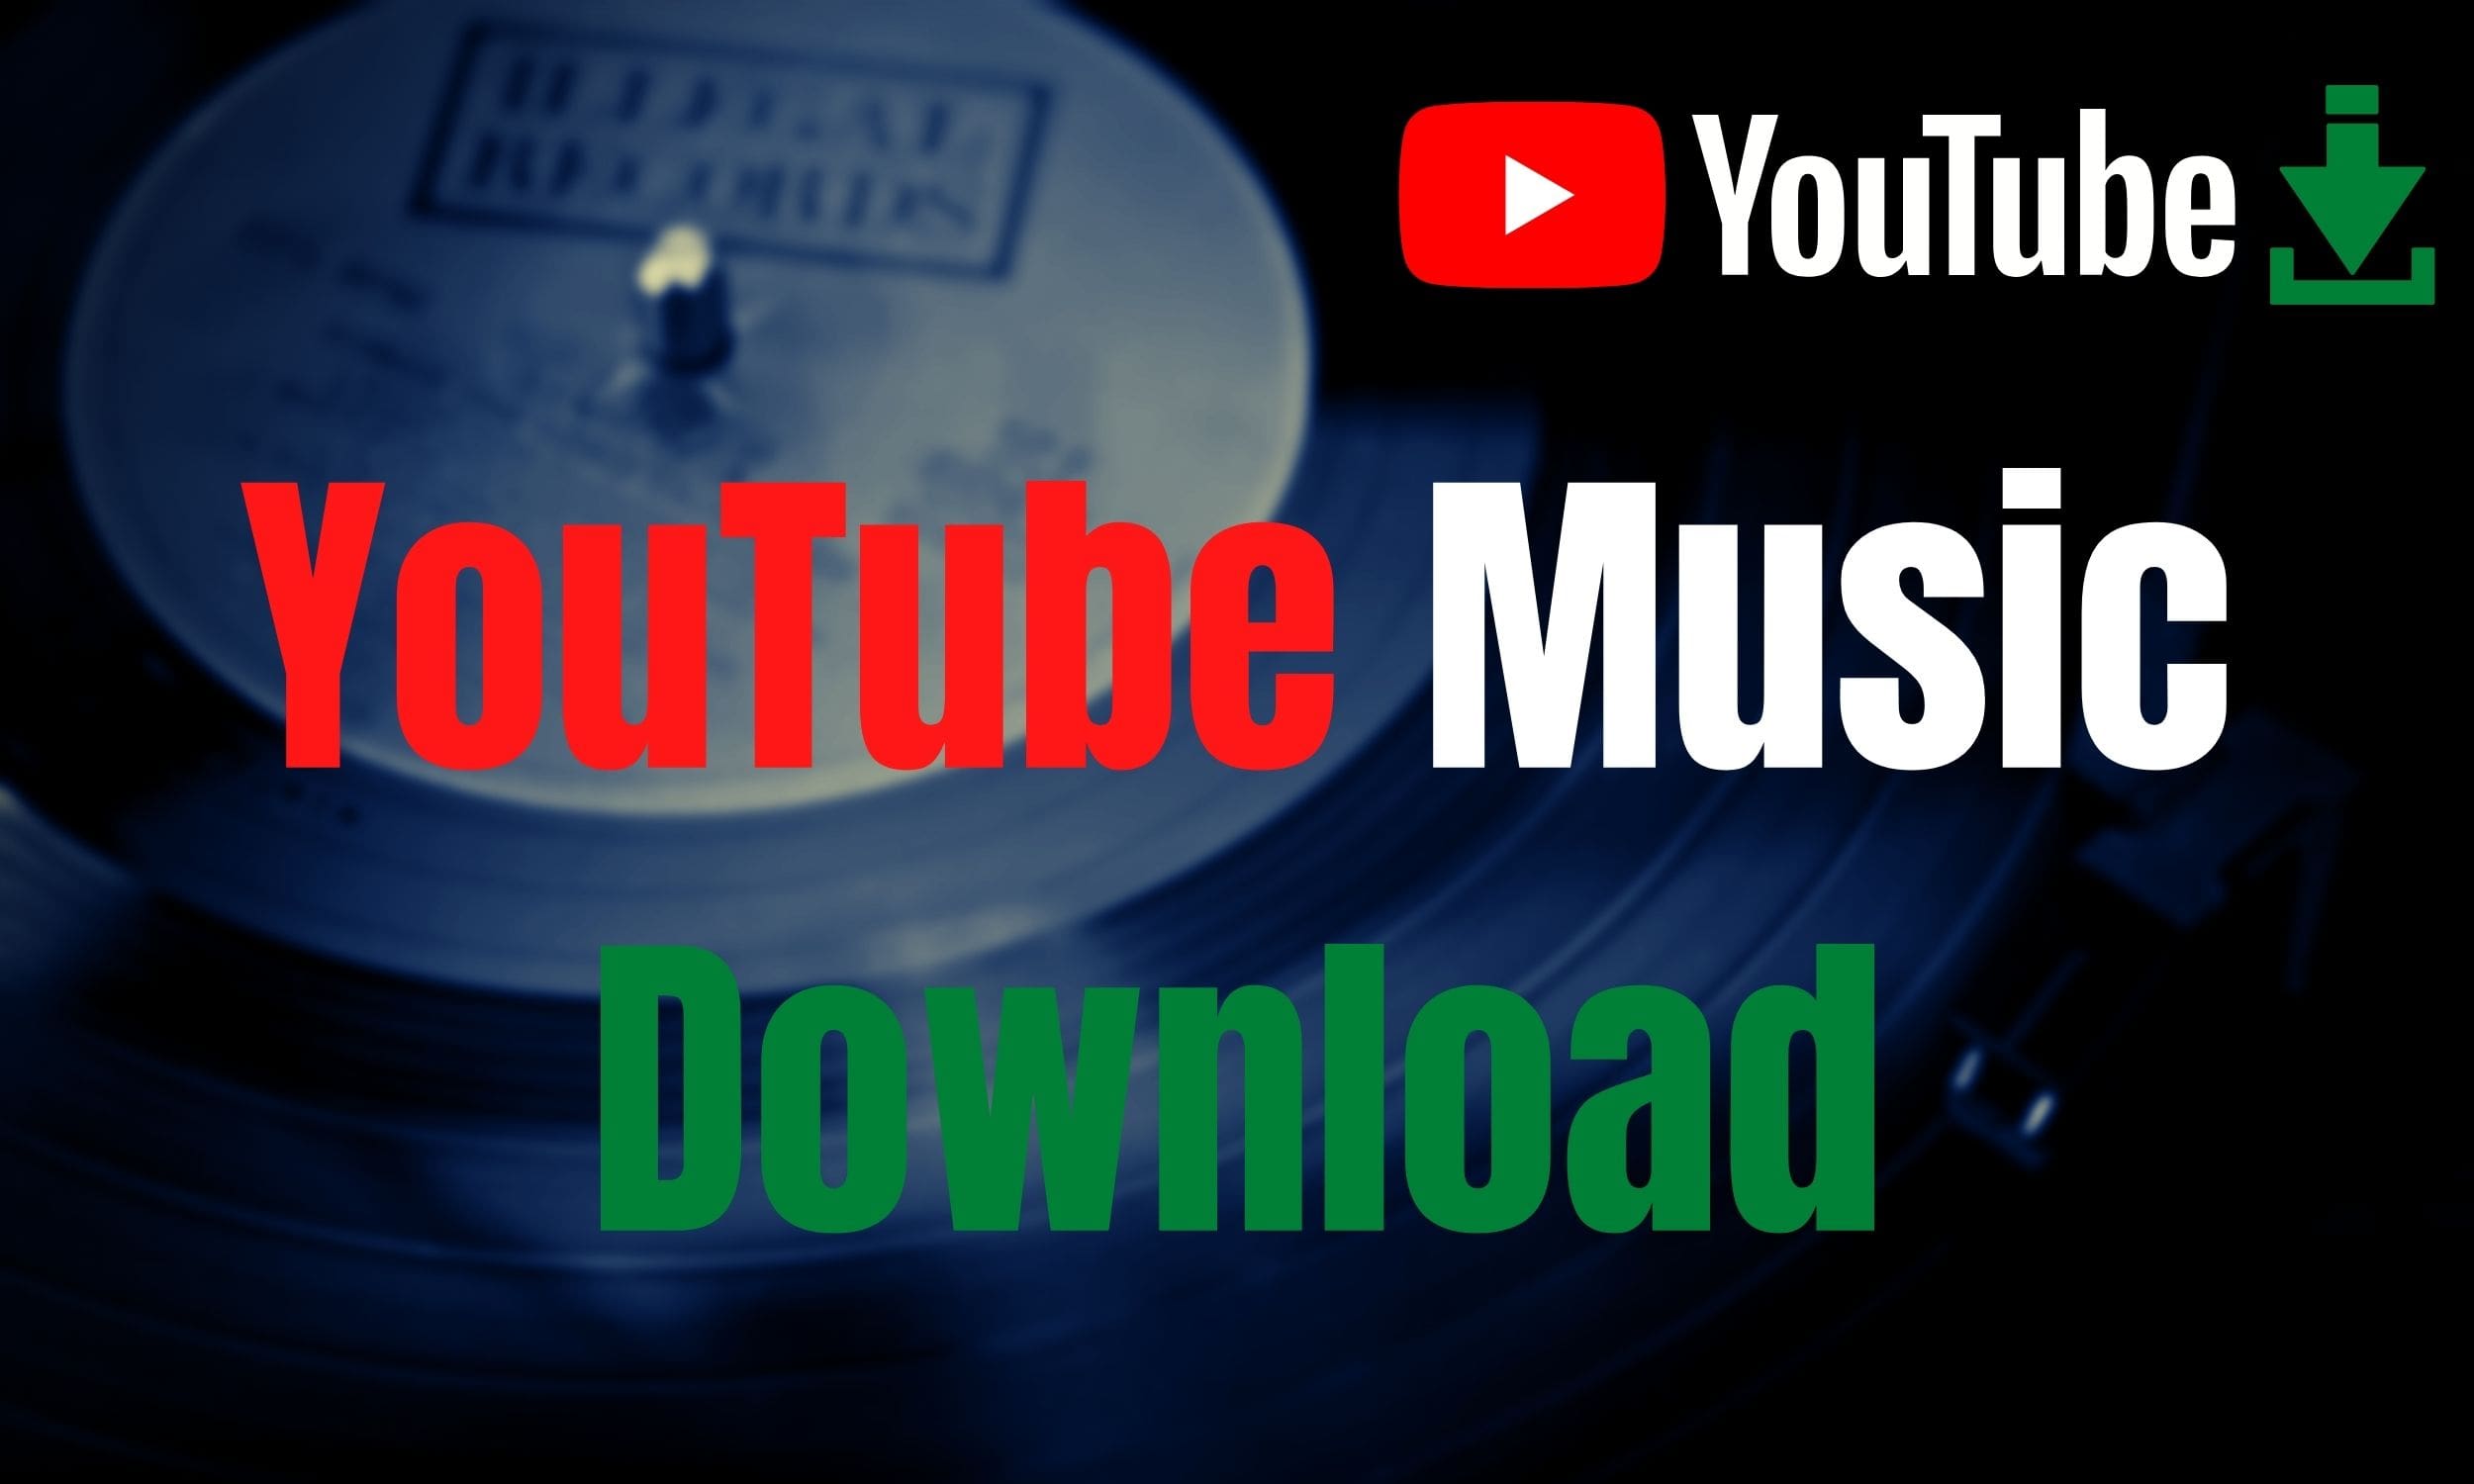 Download youtube music as mp3 ibooks pdf download